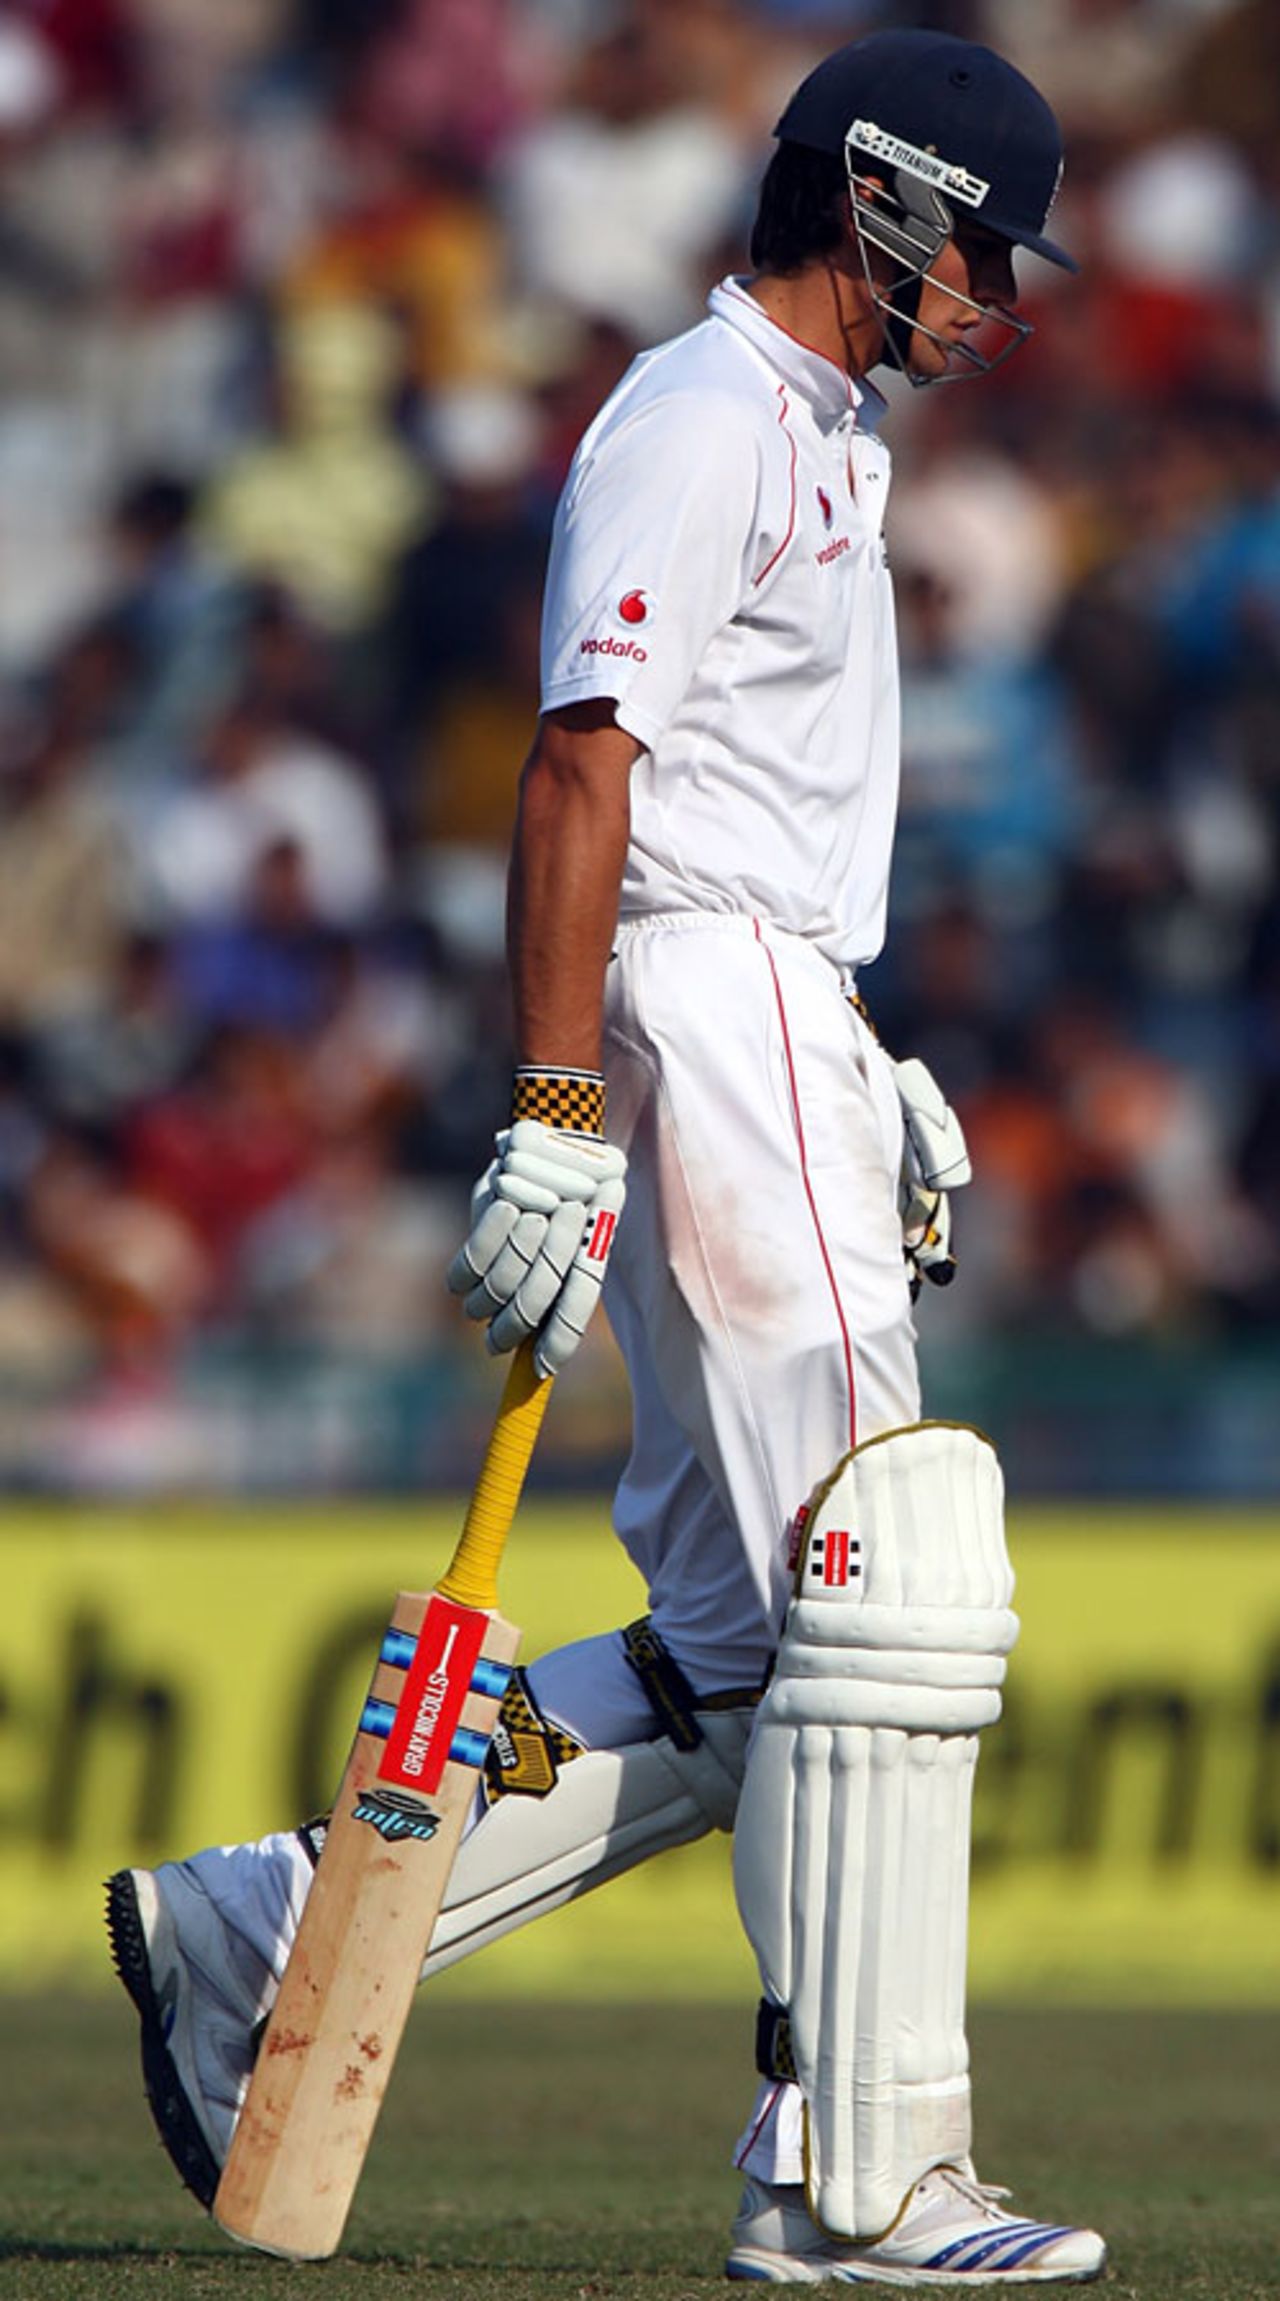 Alastair Cook walks back after edging a catch to slip off Ishant Sharma, India v England, 2nd Test, Mohali, 5th day, December 23, 2008